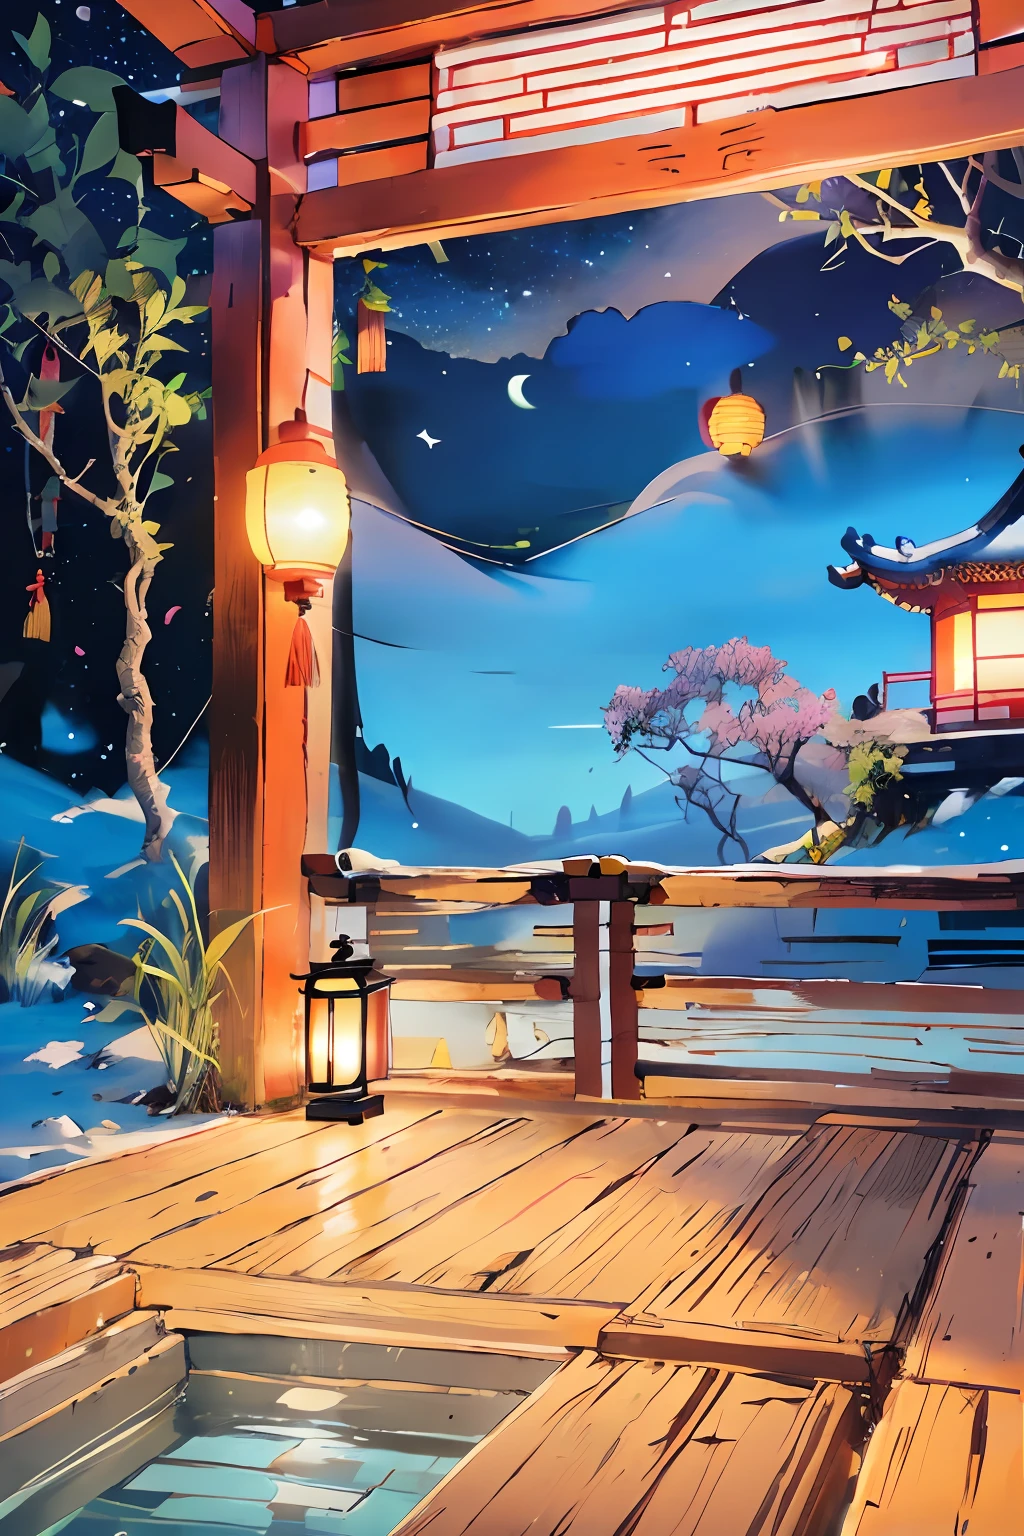 Under the stars at night，Lanterns hang in Chinese-style temples，The lantern lit up with a faint glow，On the floor sat a meditating monk，China-style，zen feeling，National style，Mid-range vision，